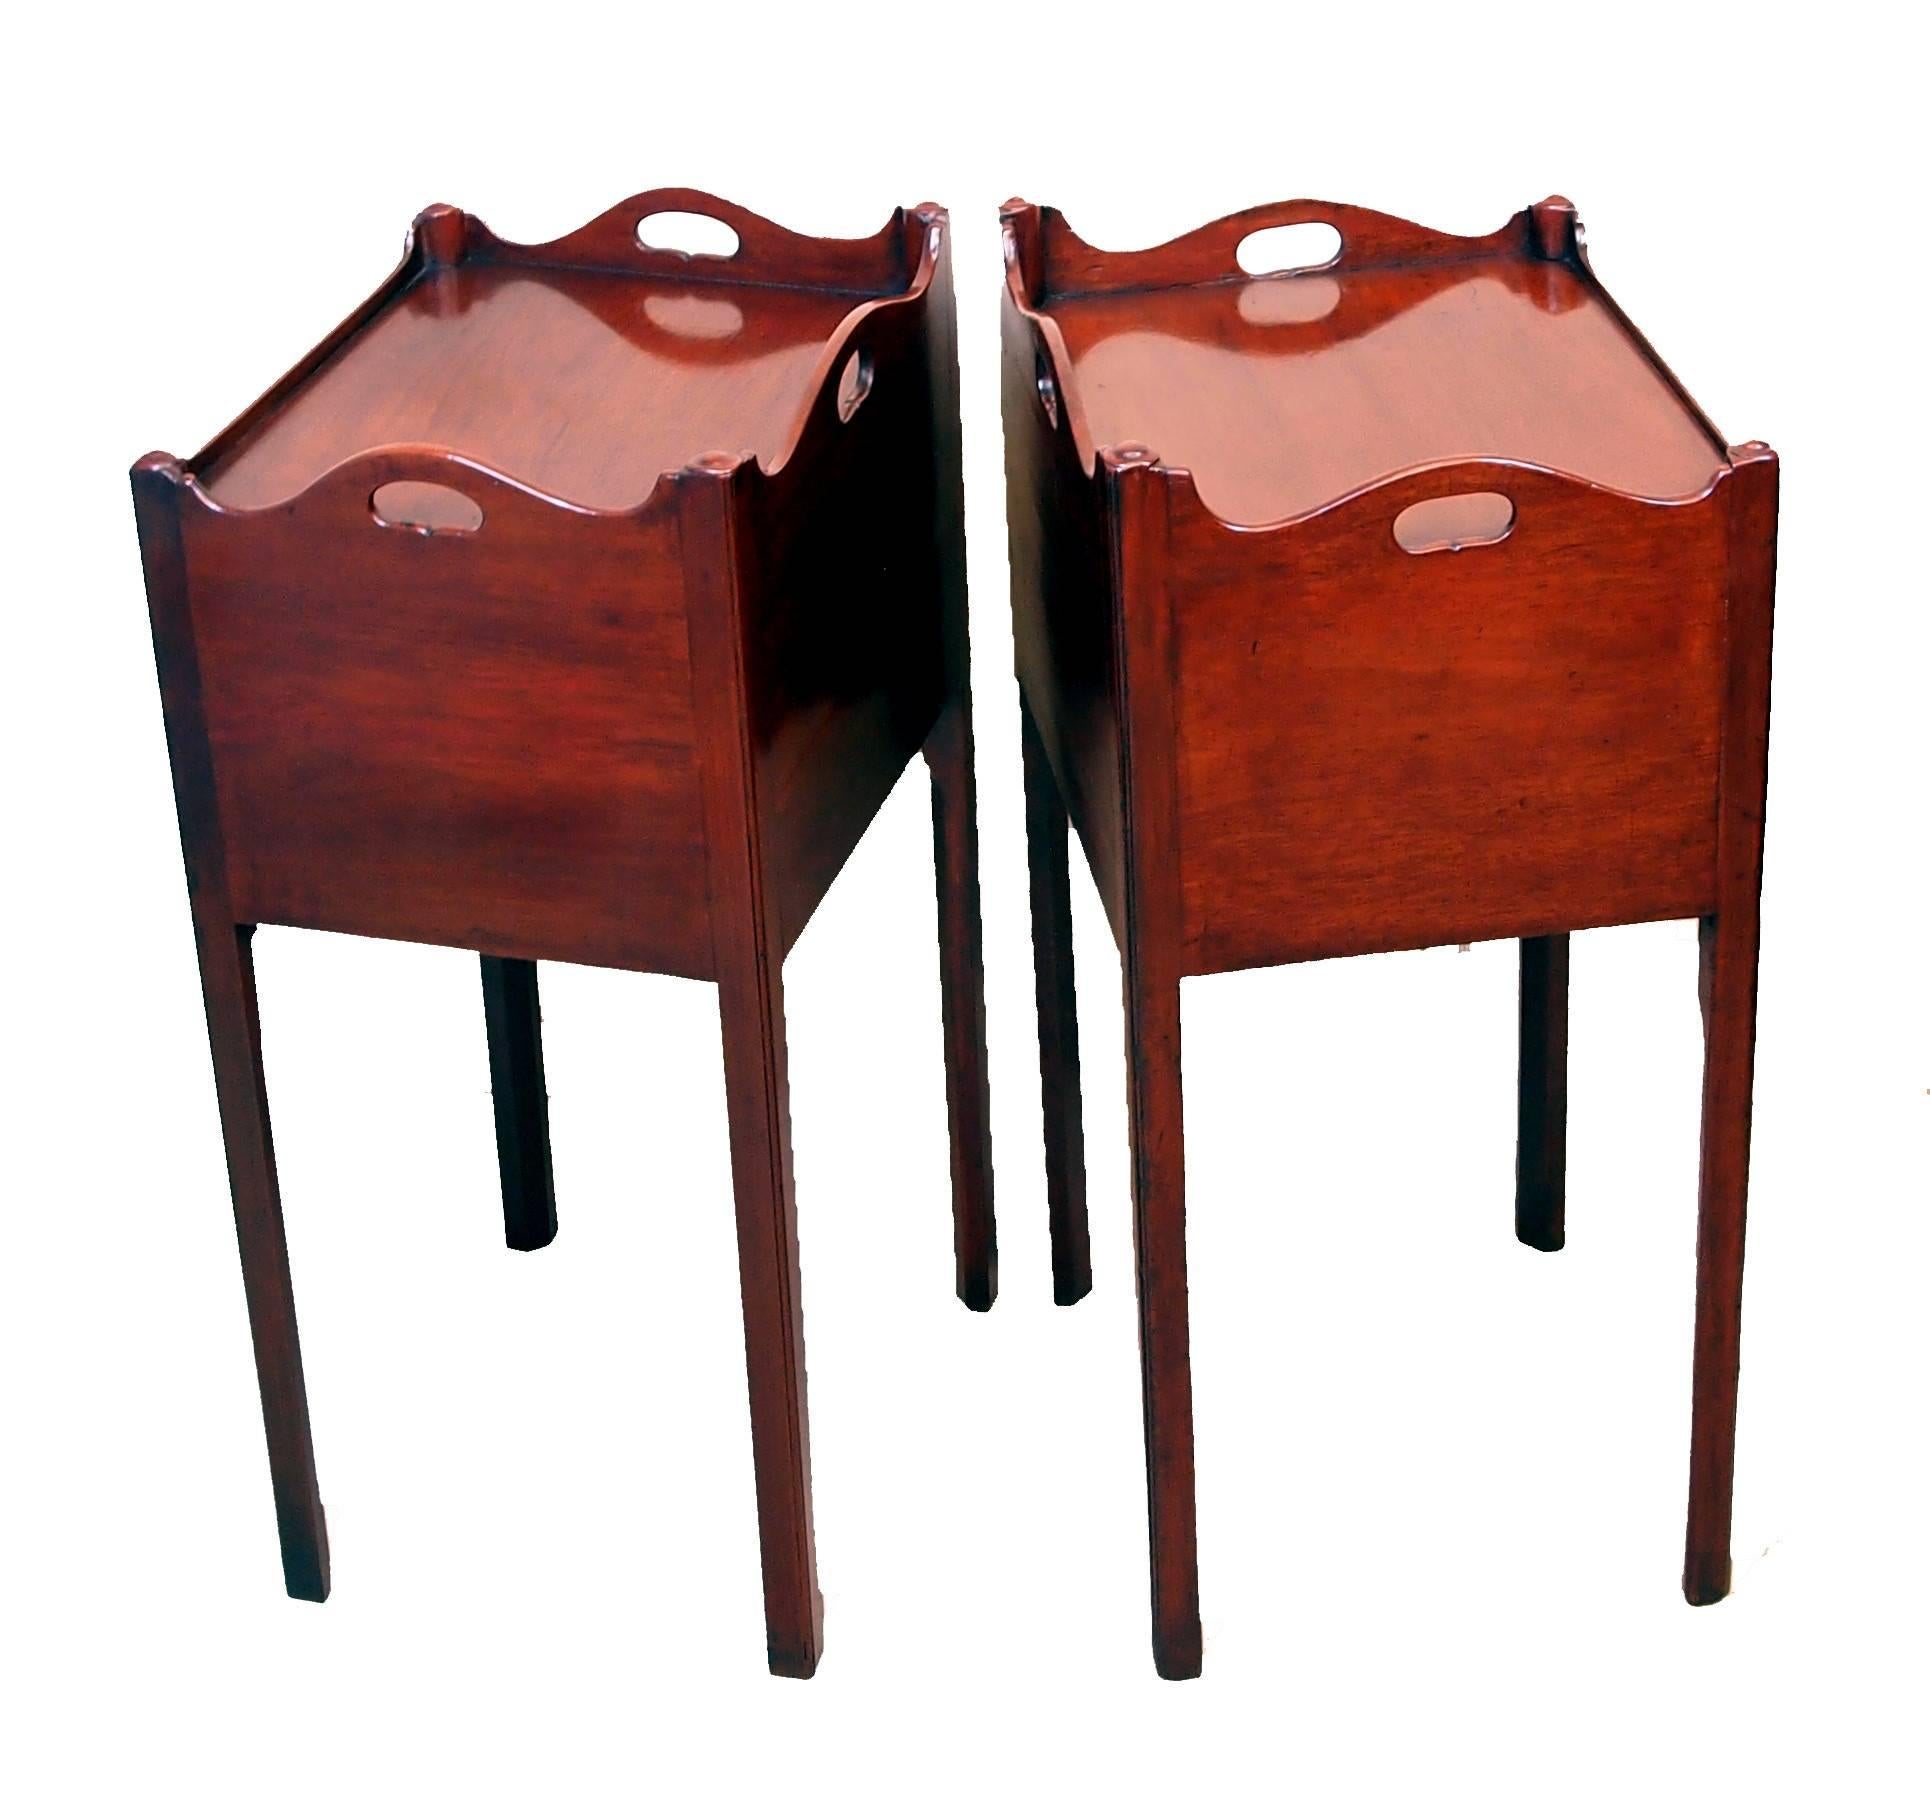 A delightful matched pair of George III period mahogany bedside
tables, or pot cupboards, having superbly figured shaped tray
tops above cavity raised on elegant square chamfered legs.